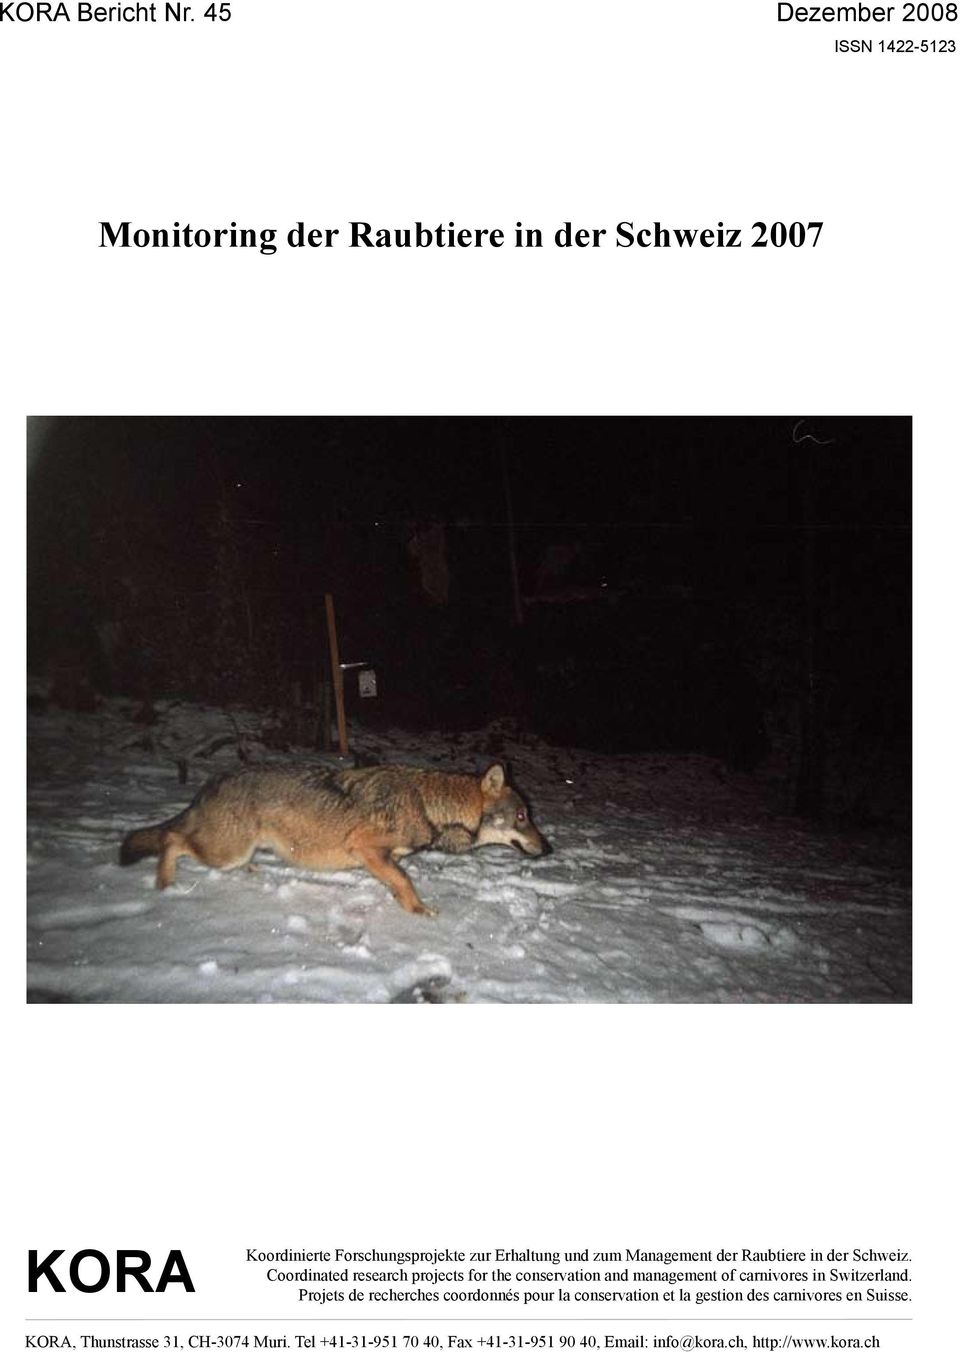 Management der Raubtiere in der Schweiz. Coordinated research projects for the conservation and management of carnivores in Switzerland.